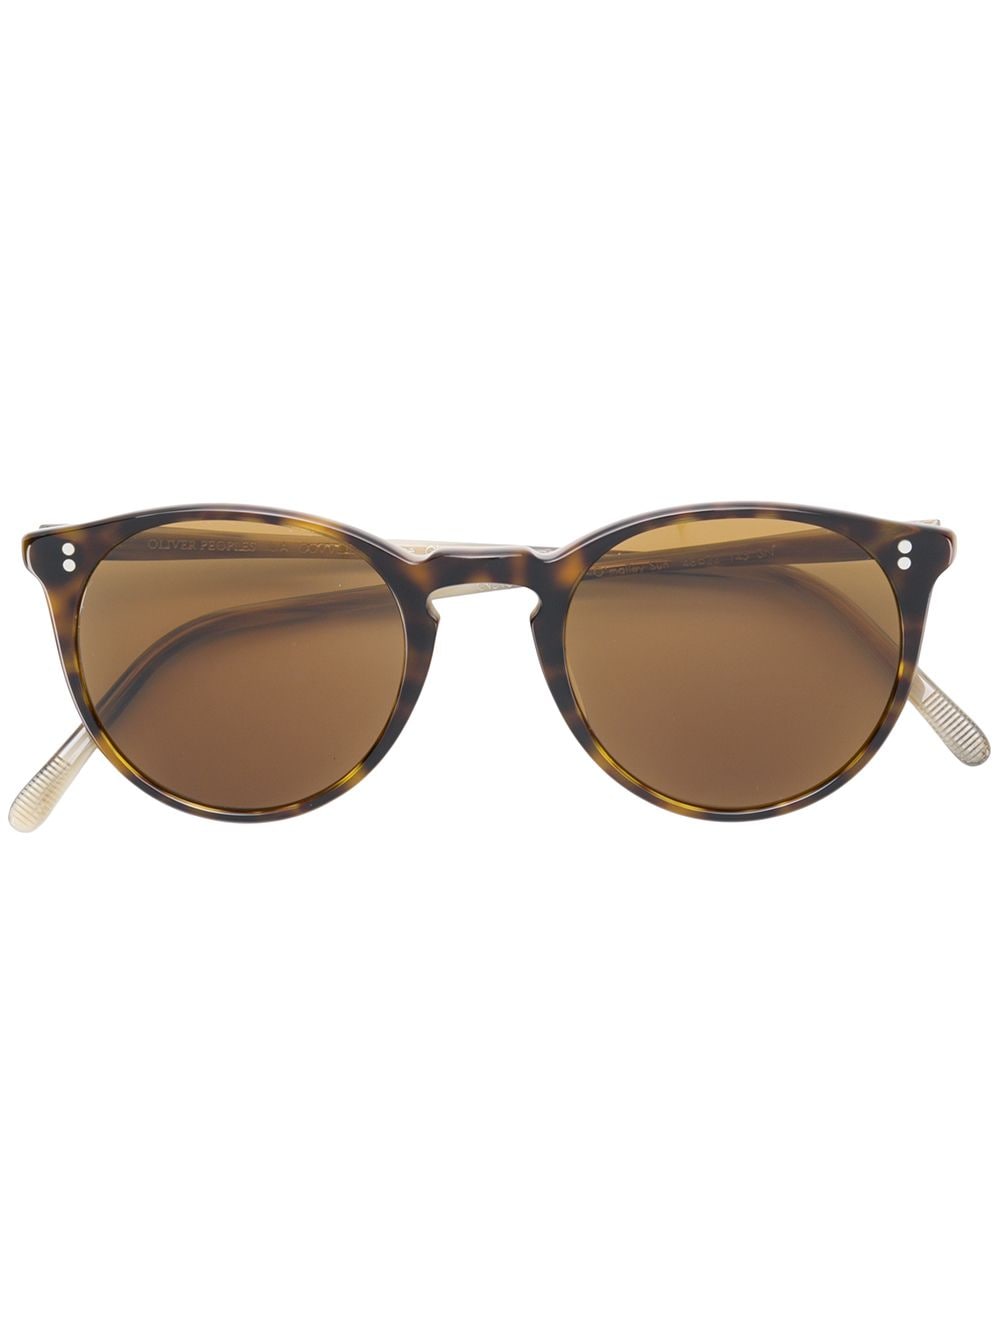 OLIVER PEOPLES O'MAILLEY太阳眼镜 - 棕色